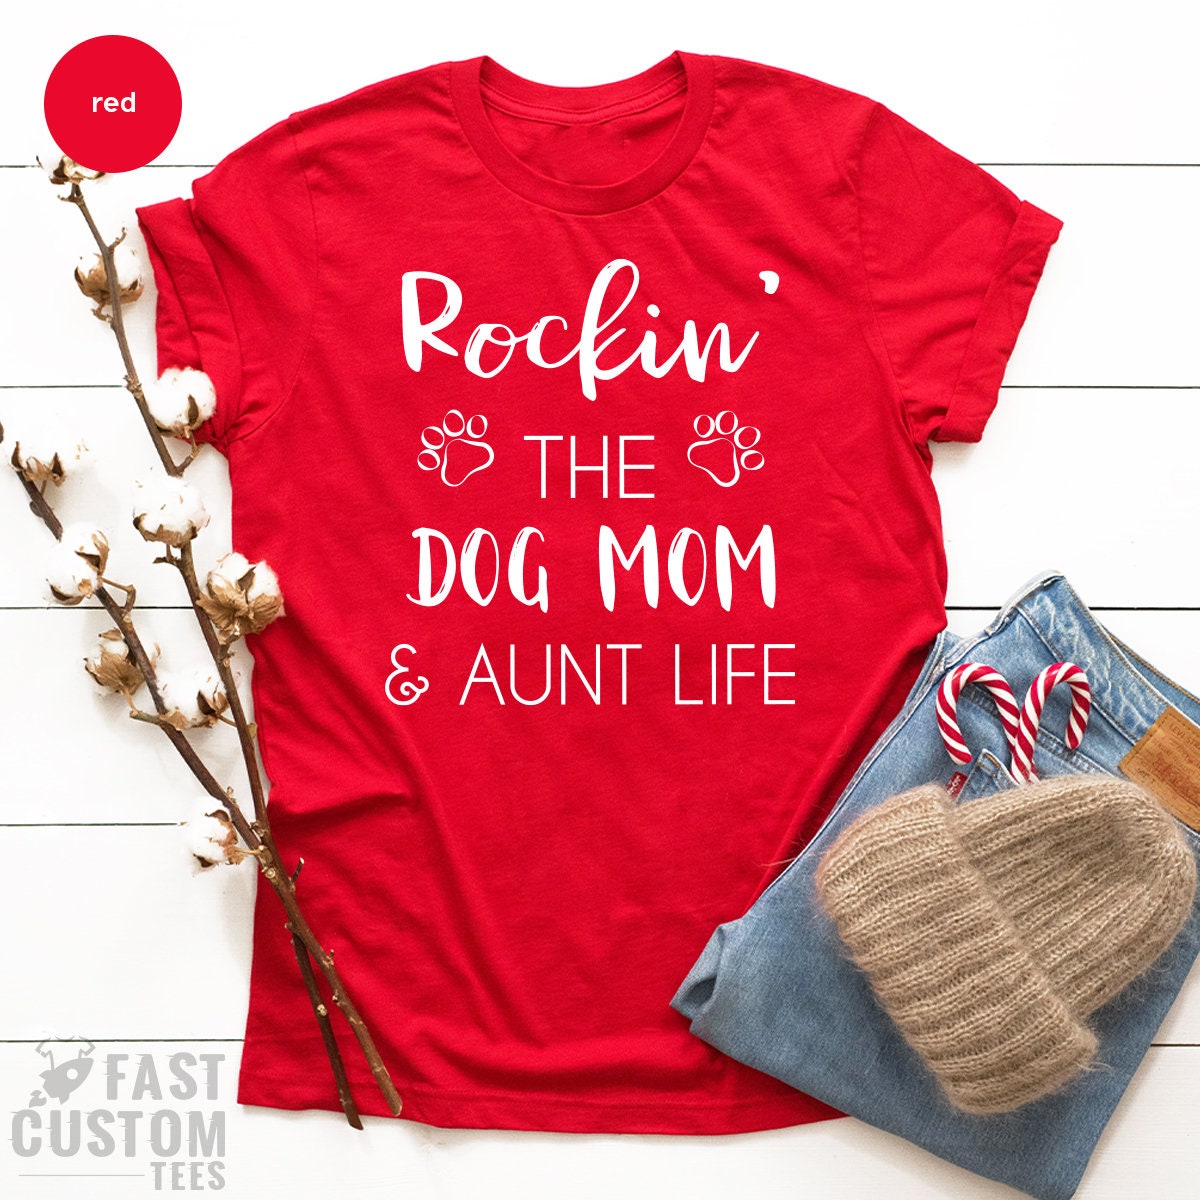 Dog Mom TShirt, Aunt Dog Mama Tee, Gift For Sister, Dog Mom Auntie Shirt, Dog Mom And Aunt Life, Dog Lover Aunt Tee, Best Aunt Gift - Fastdeliverytees.com